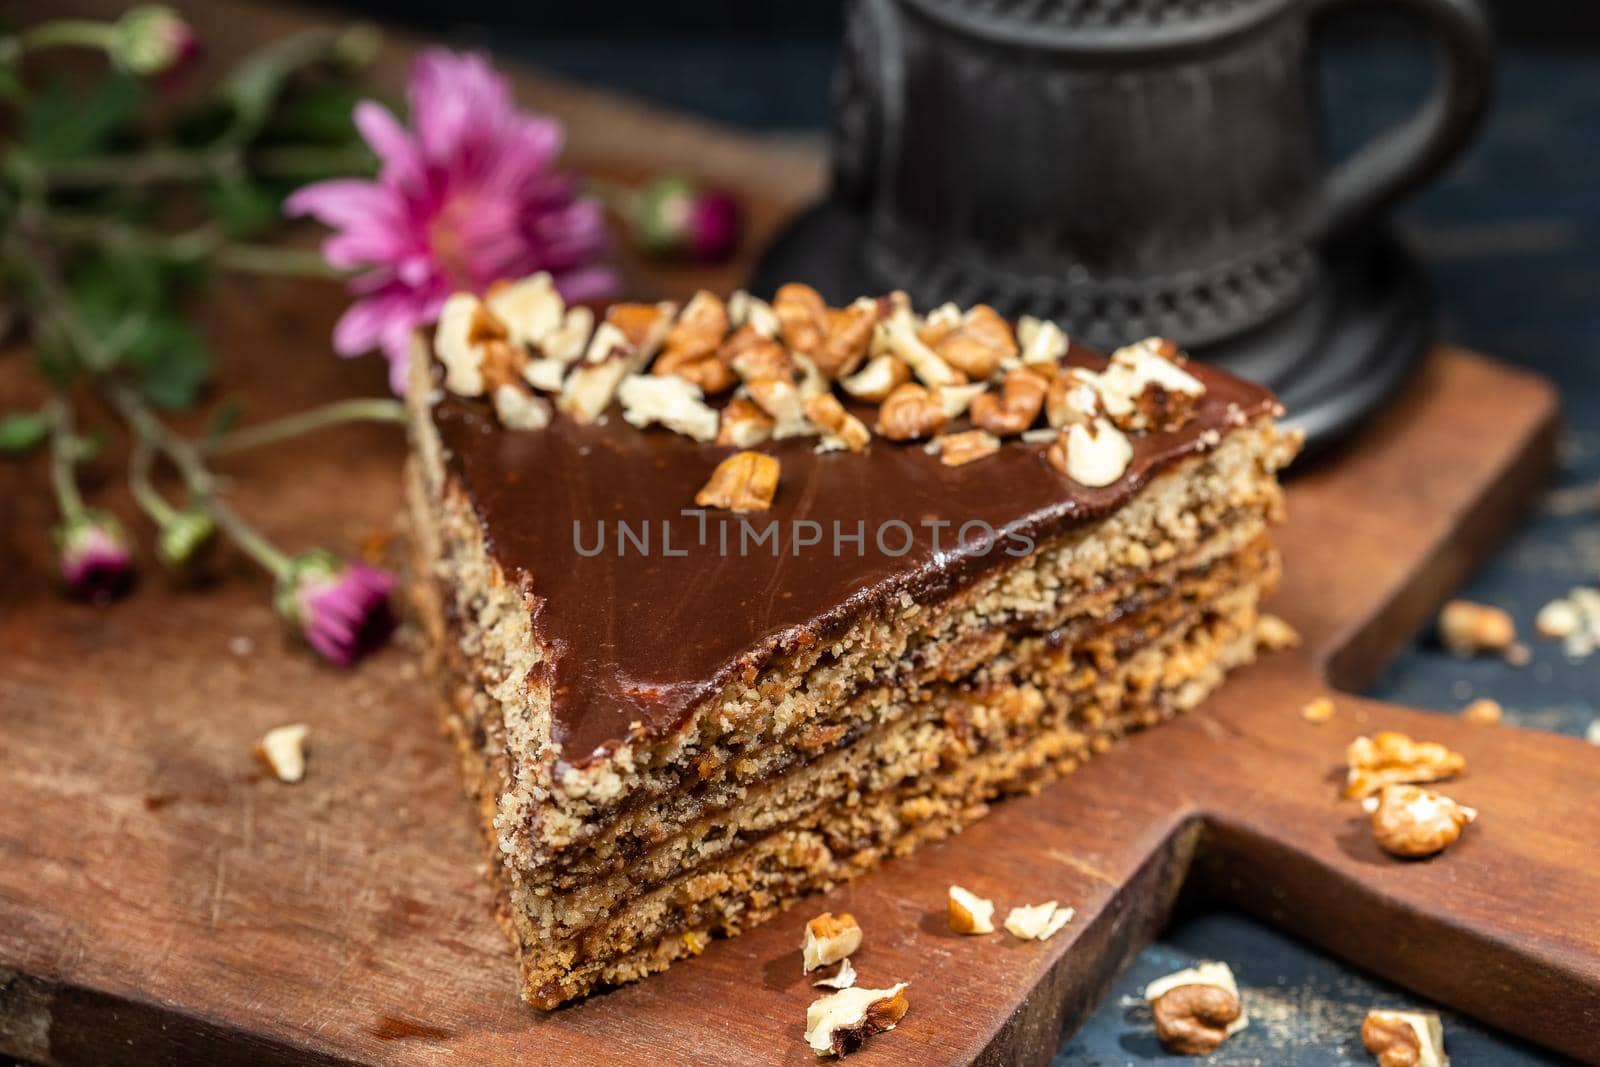 Piece of cake with walnuts on a dark wood background